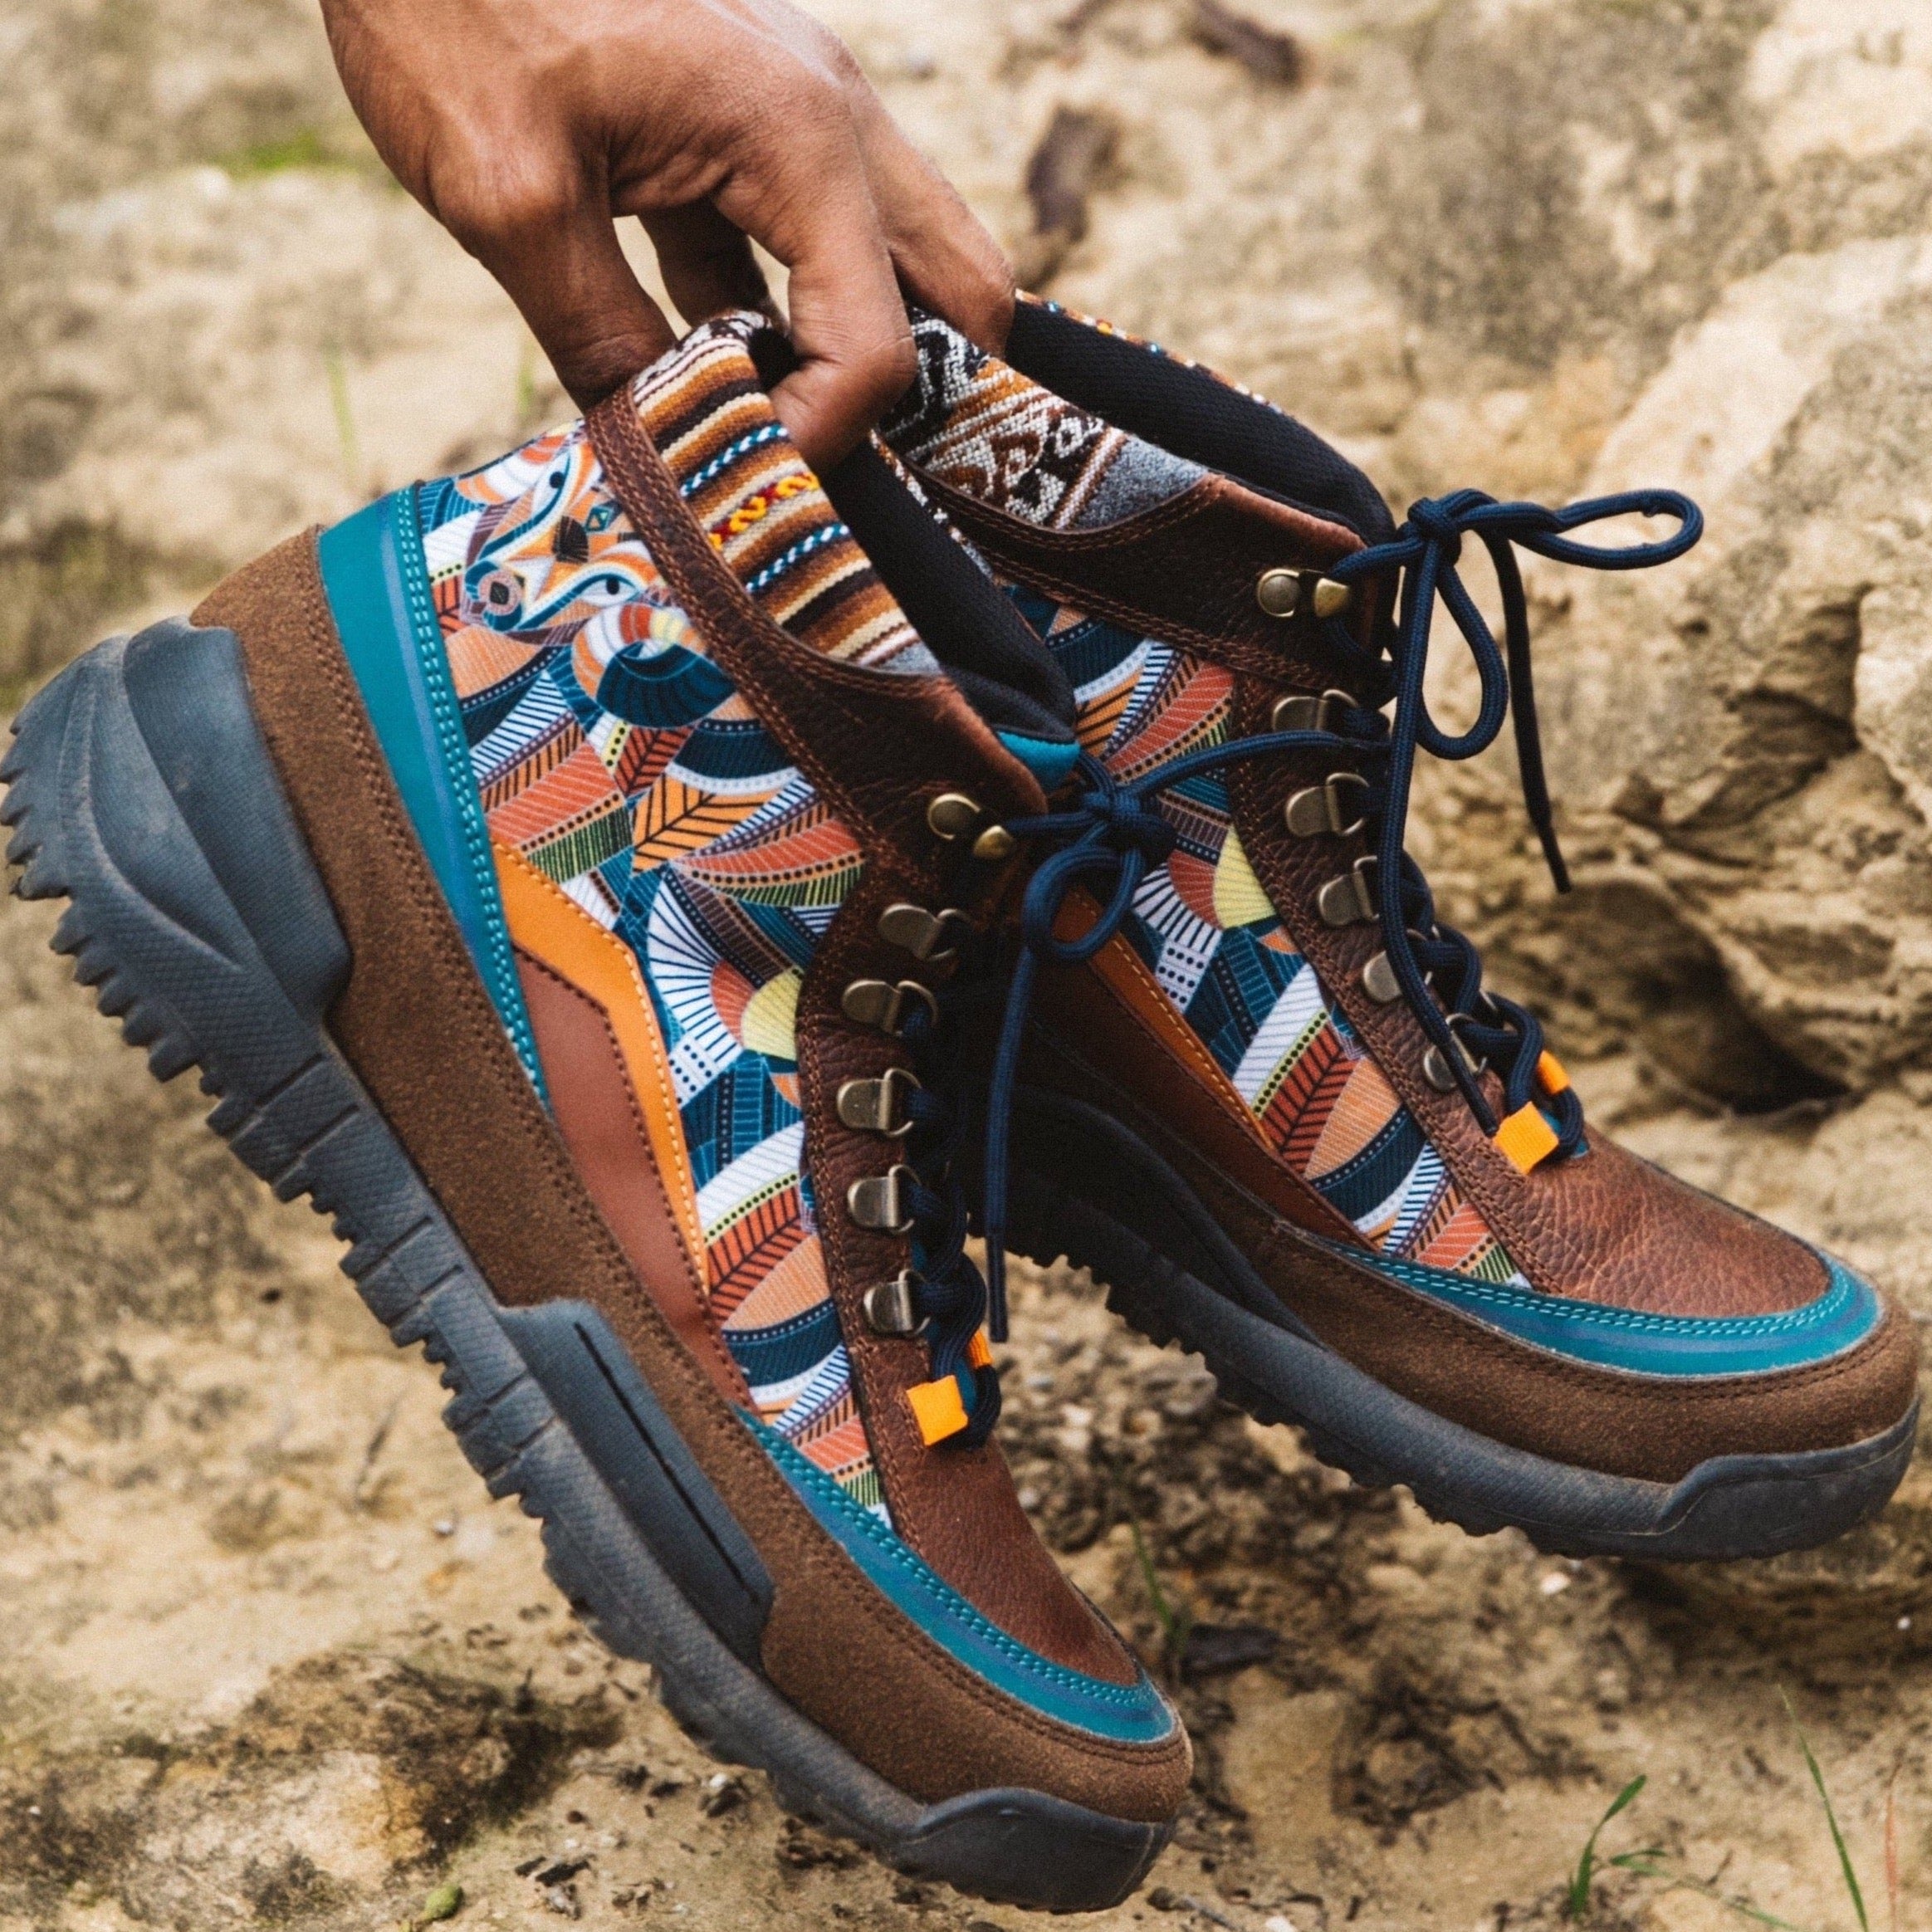 LOUIS VUITTON Hiking Sneakers - More Than You Can Imagine